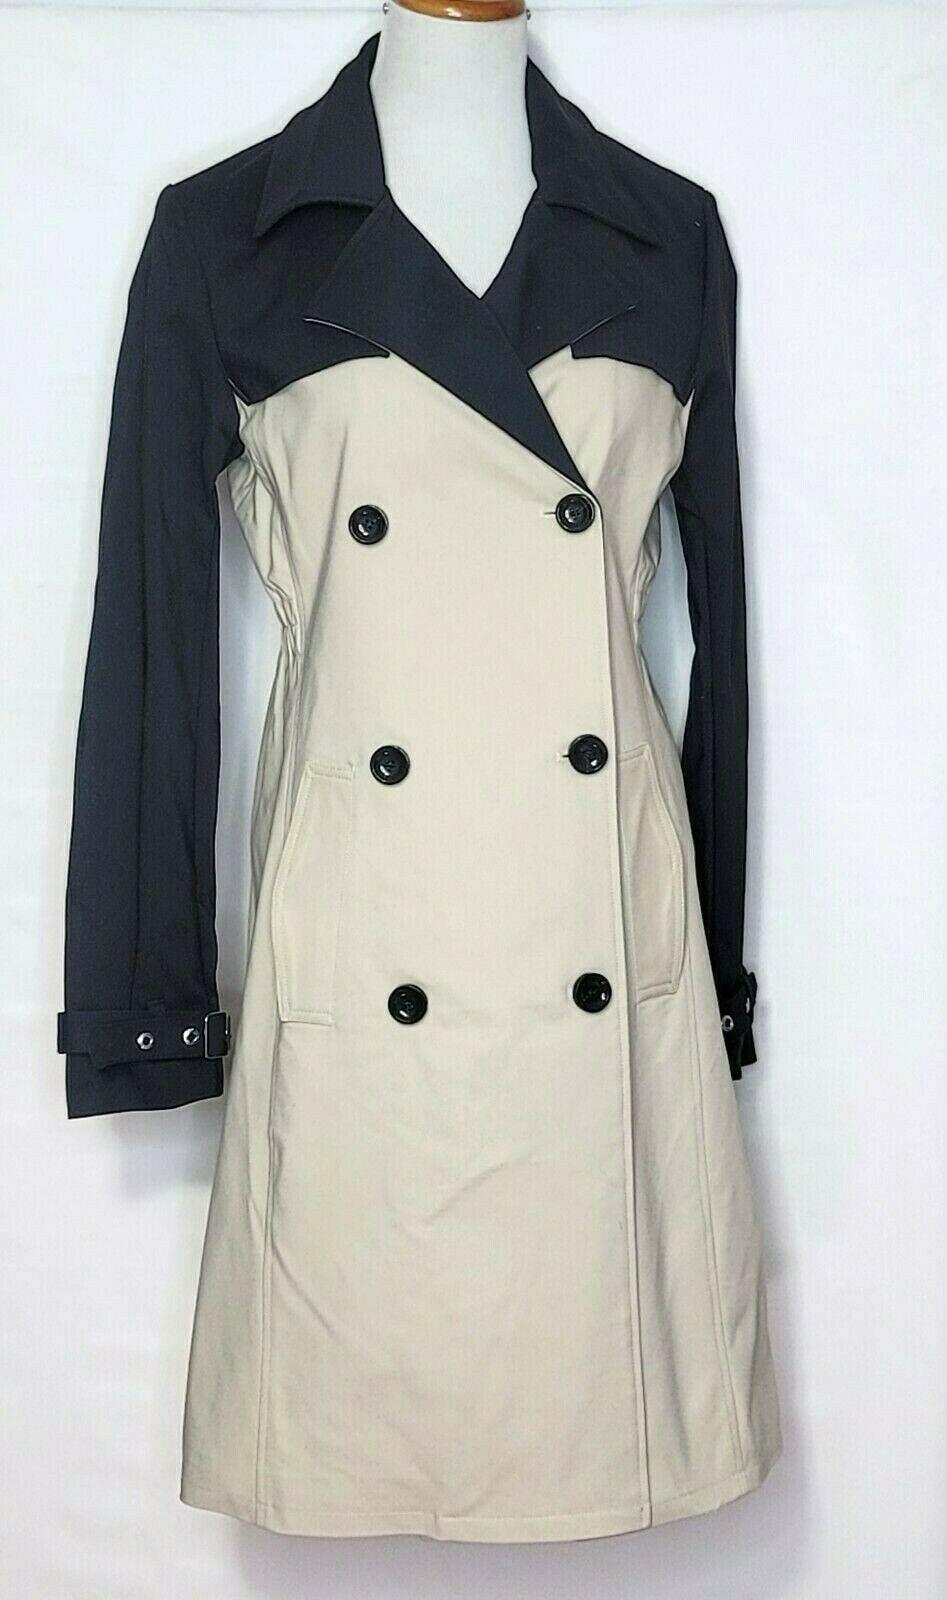 Karl Lagerfeld Womens Elegant Classic Double-Breasted Black Beige Trench Coat S - SVNYFancy